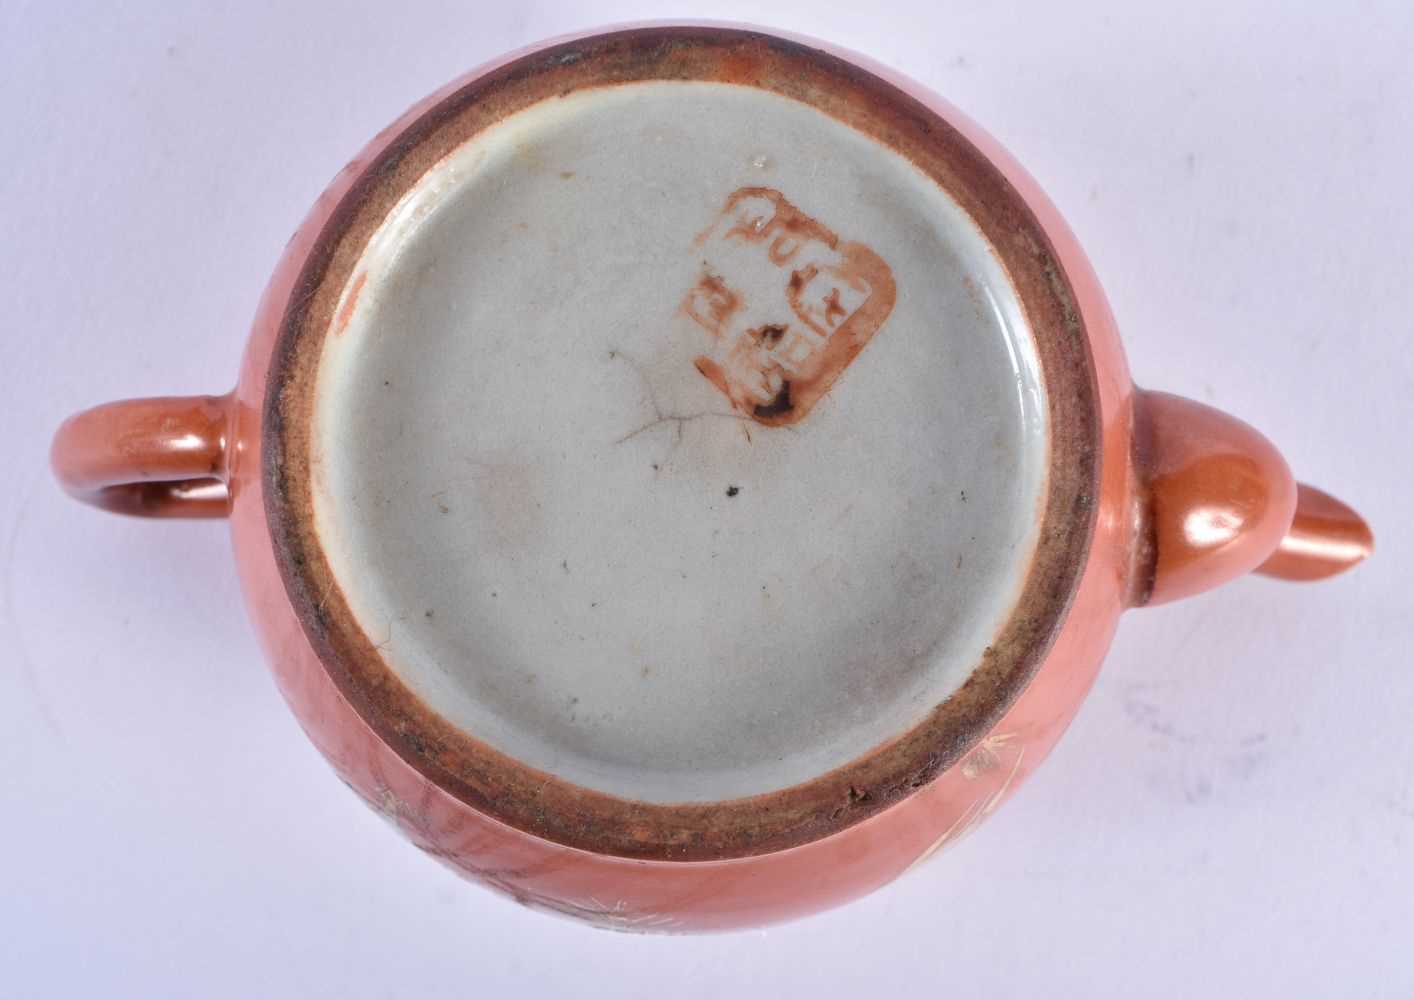 A CHINESE REPUBLICAN PERIOD CORAL GROUND PORCELAIN TEAPOT AND COVER. 14 cm wide. - Image 5 of 5